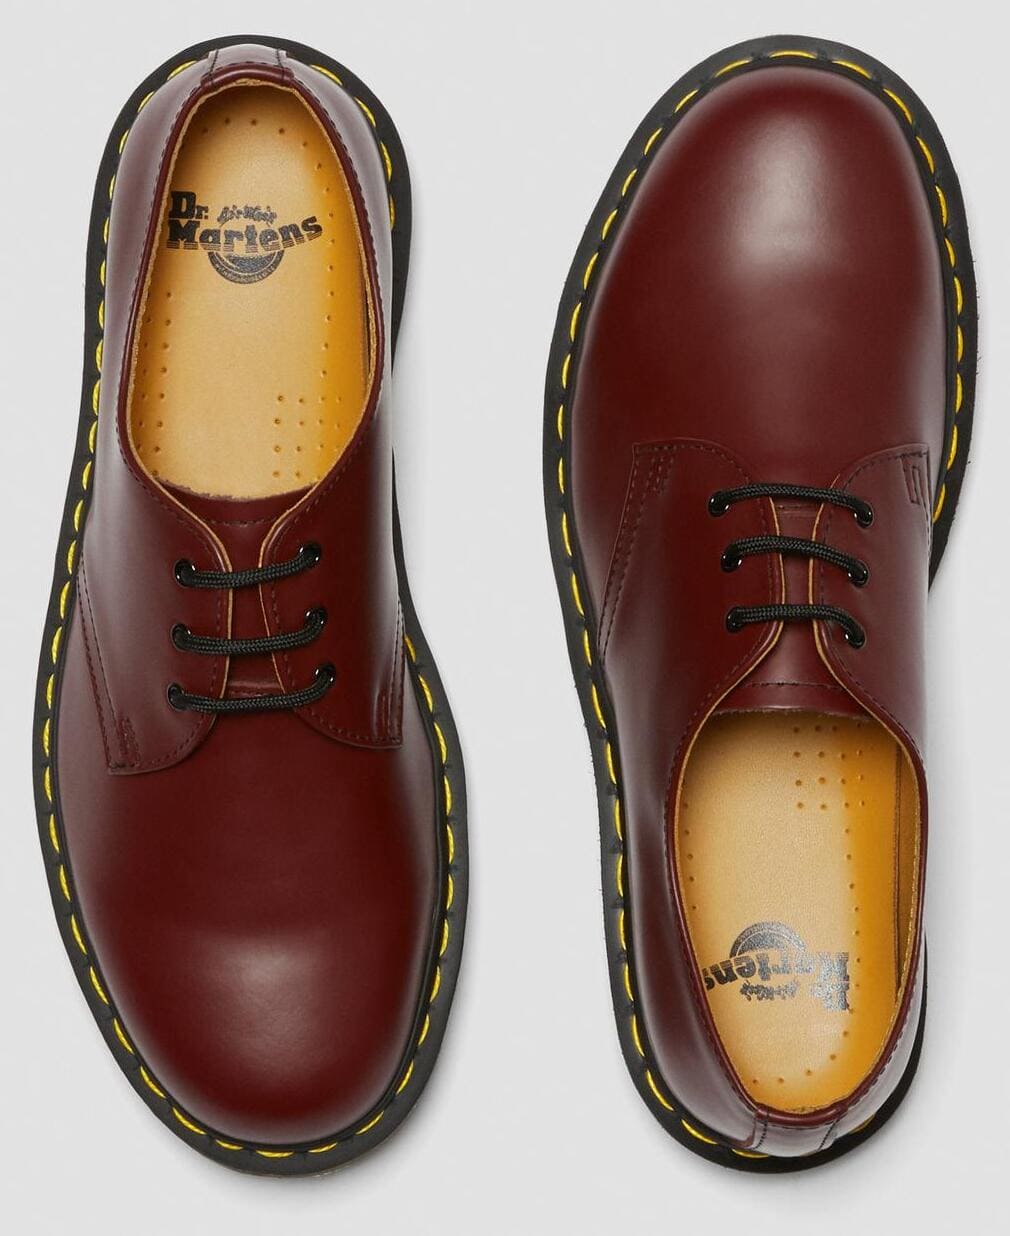 Dr. Martens 1461 59 Smooth Leather Oxford Shoes Cherry Red